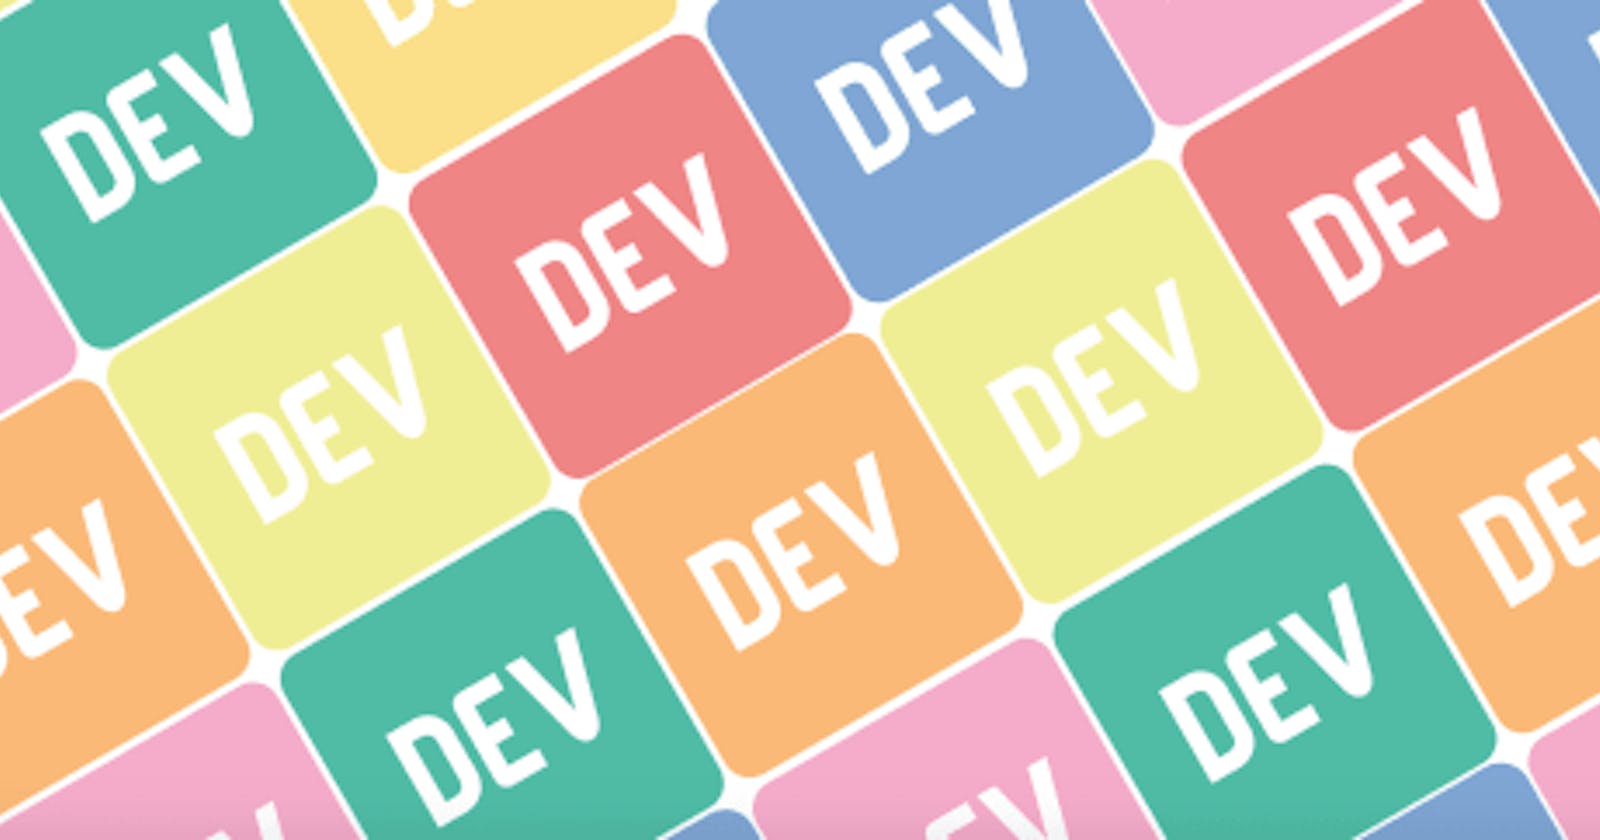 I have moved to dev.to